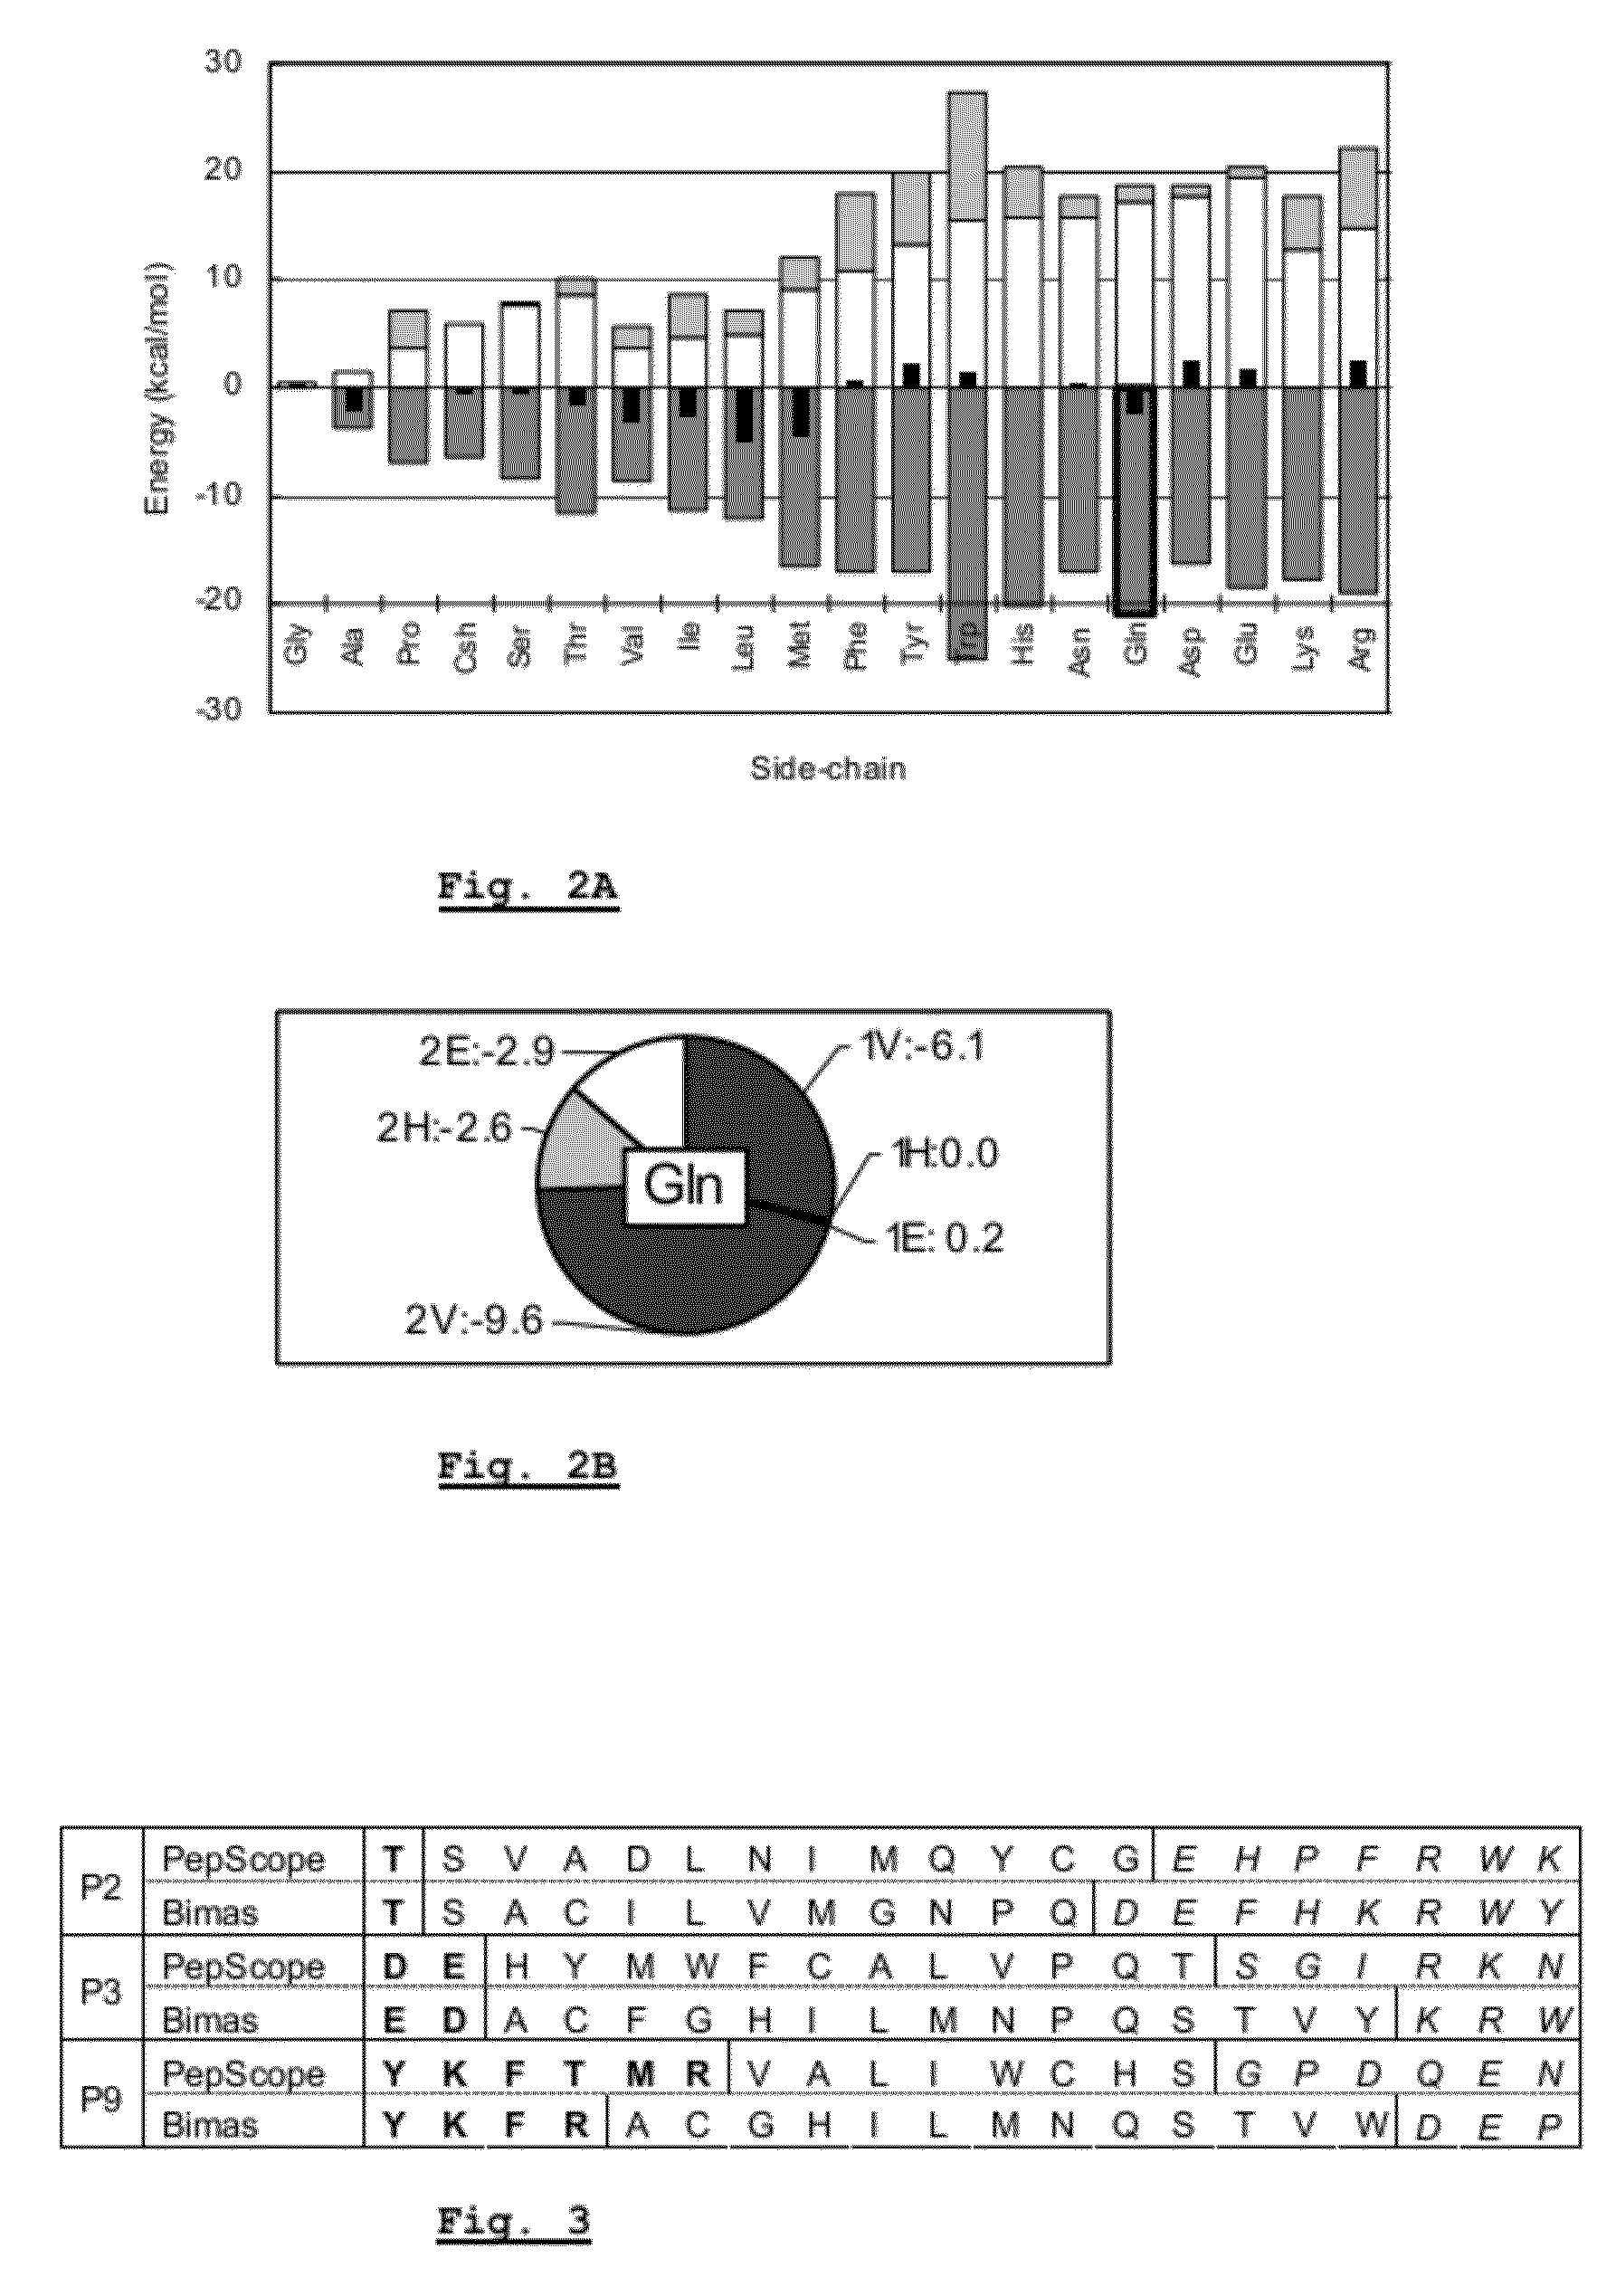 Method for affinity scoring of peptide/protein complexes